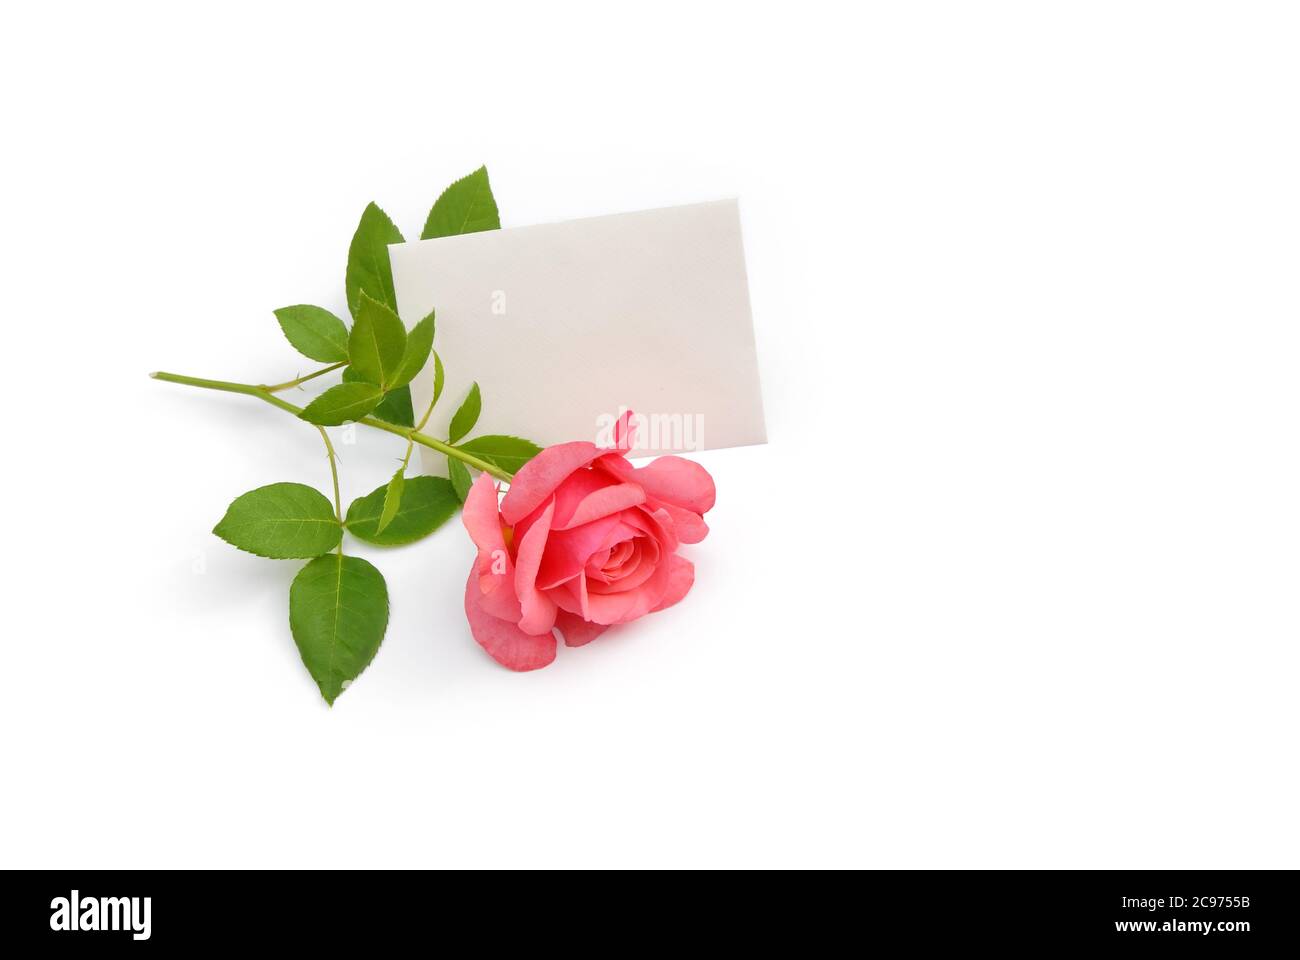 13,209 Rose Petals Dinner Images, Stock Photos, 3D objects